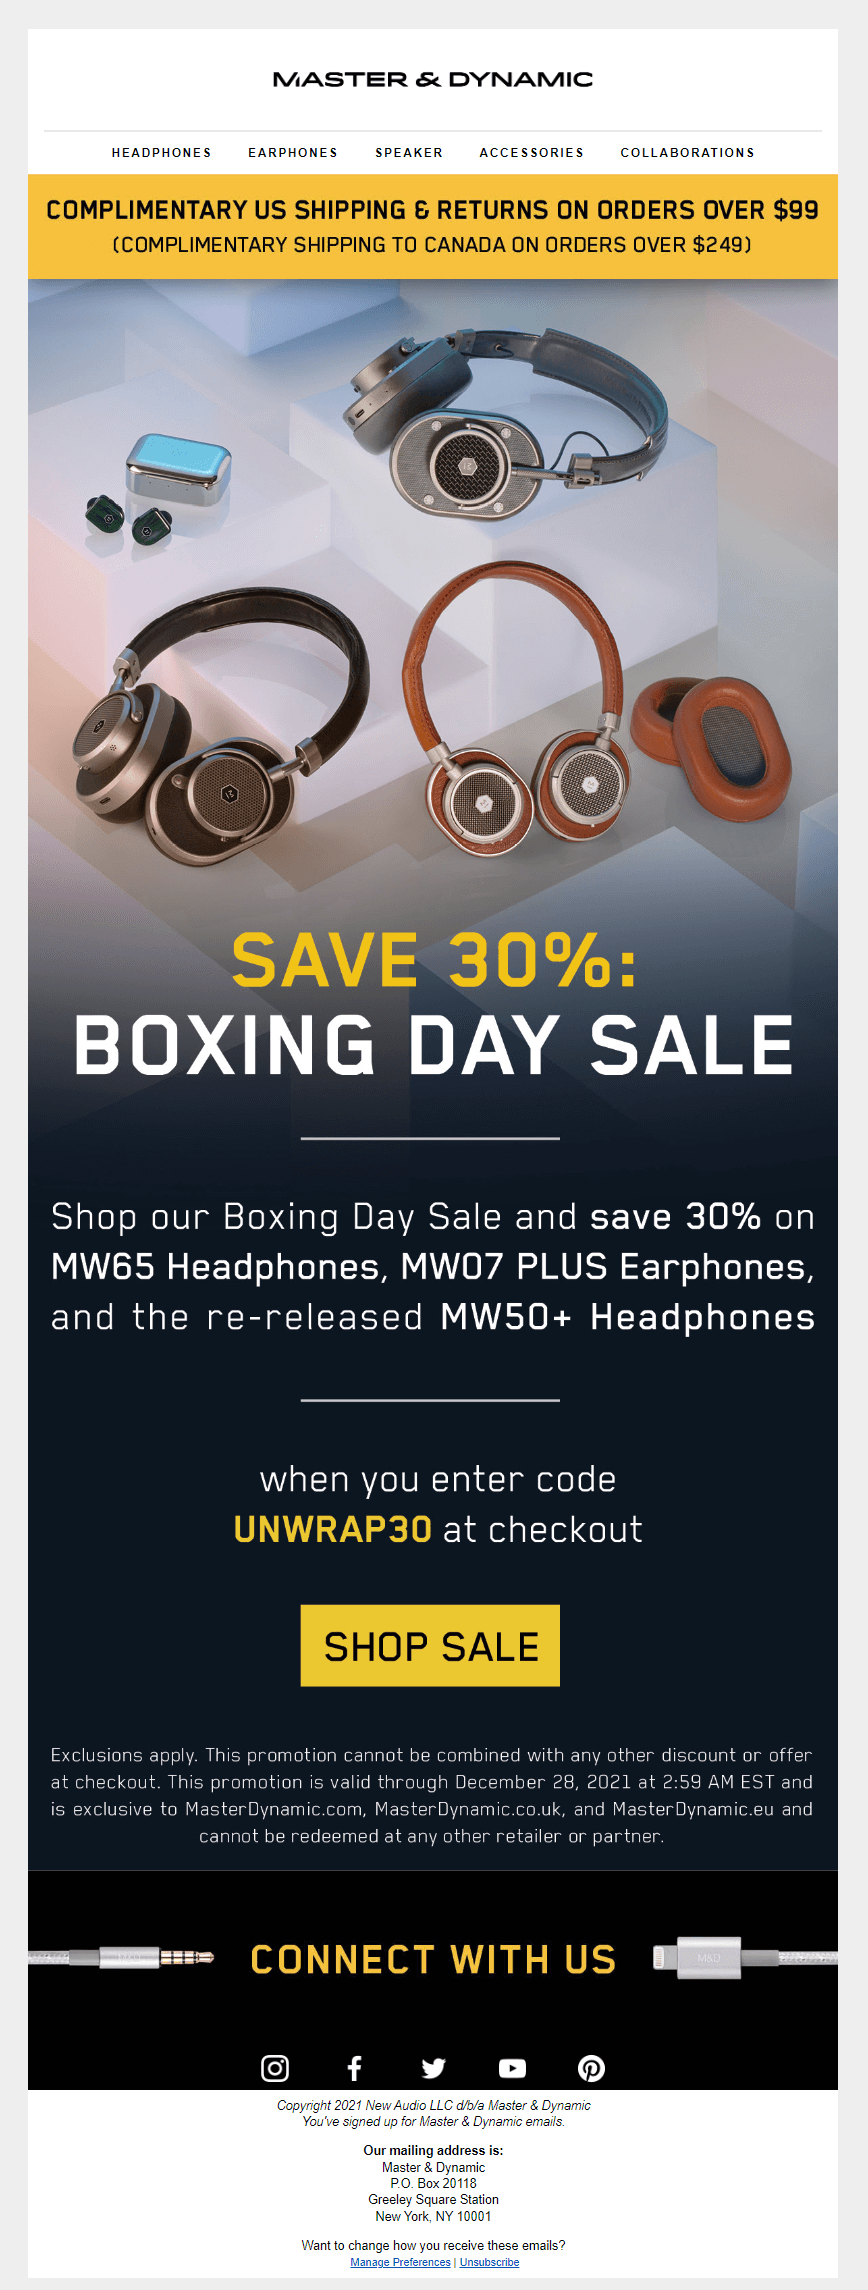 master & dynamic boxing day email newsletter 